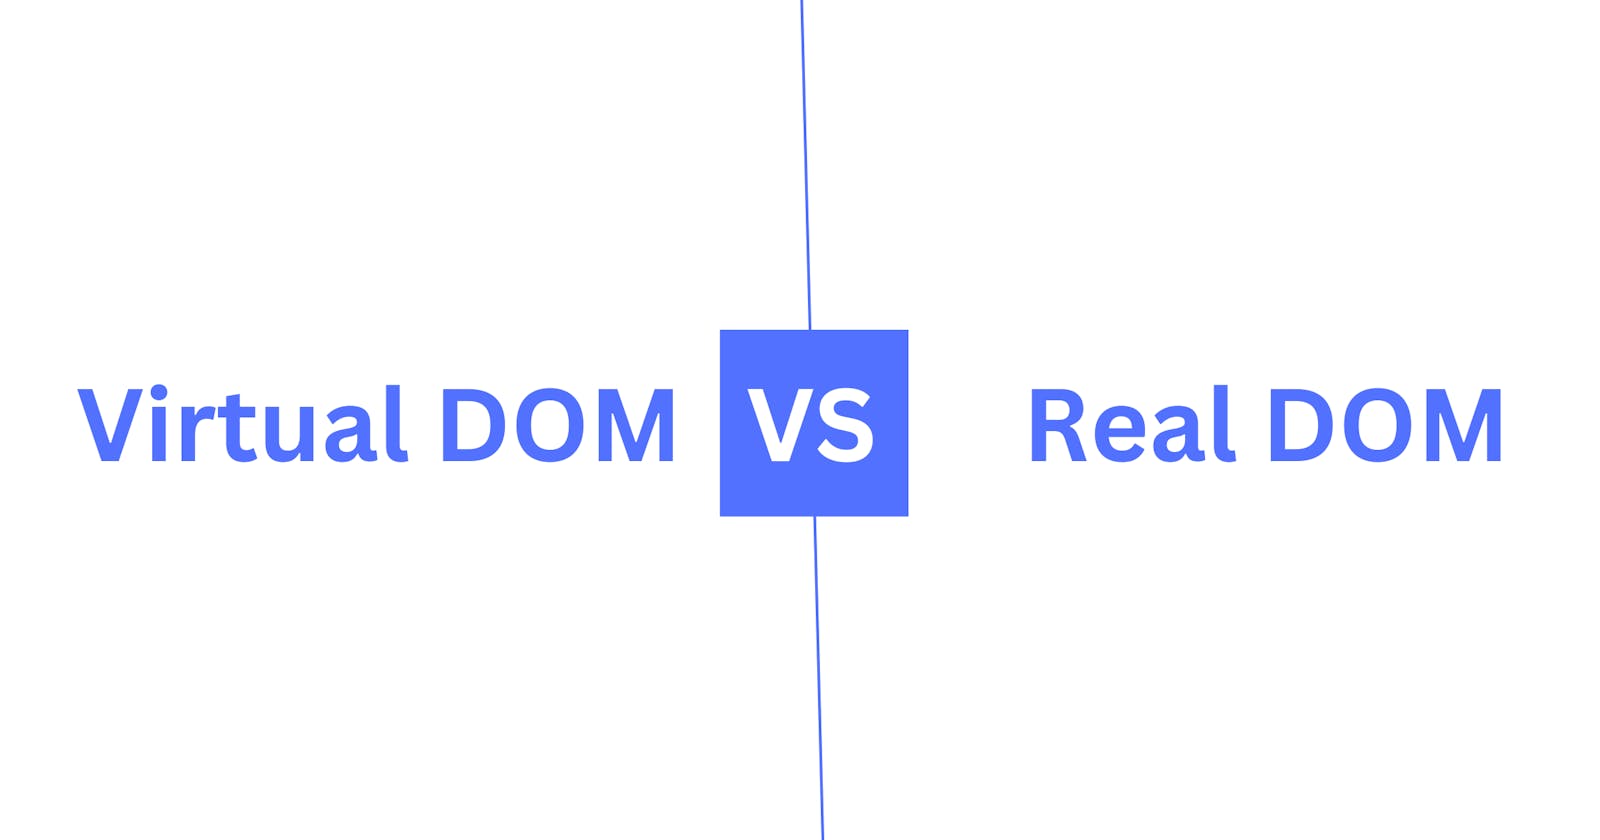 Difference between virtual and real DOM